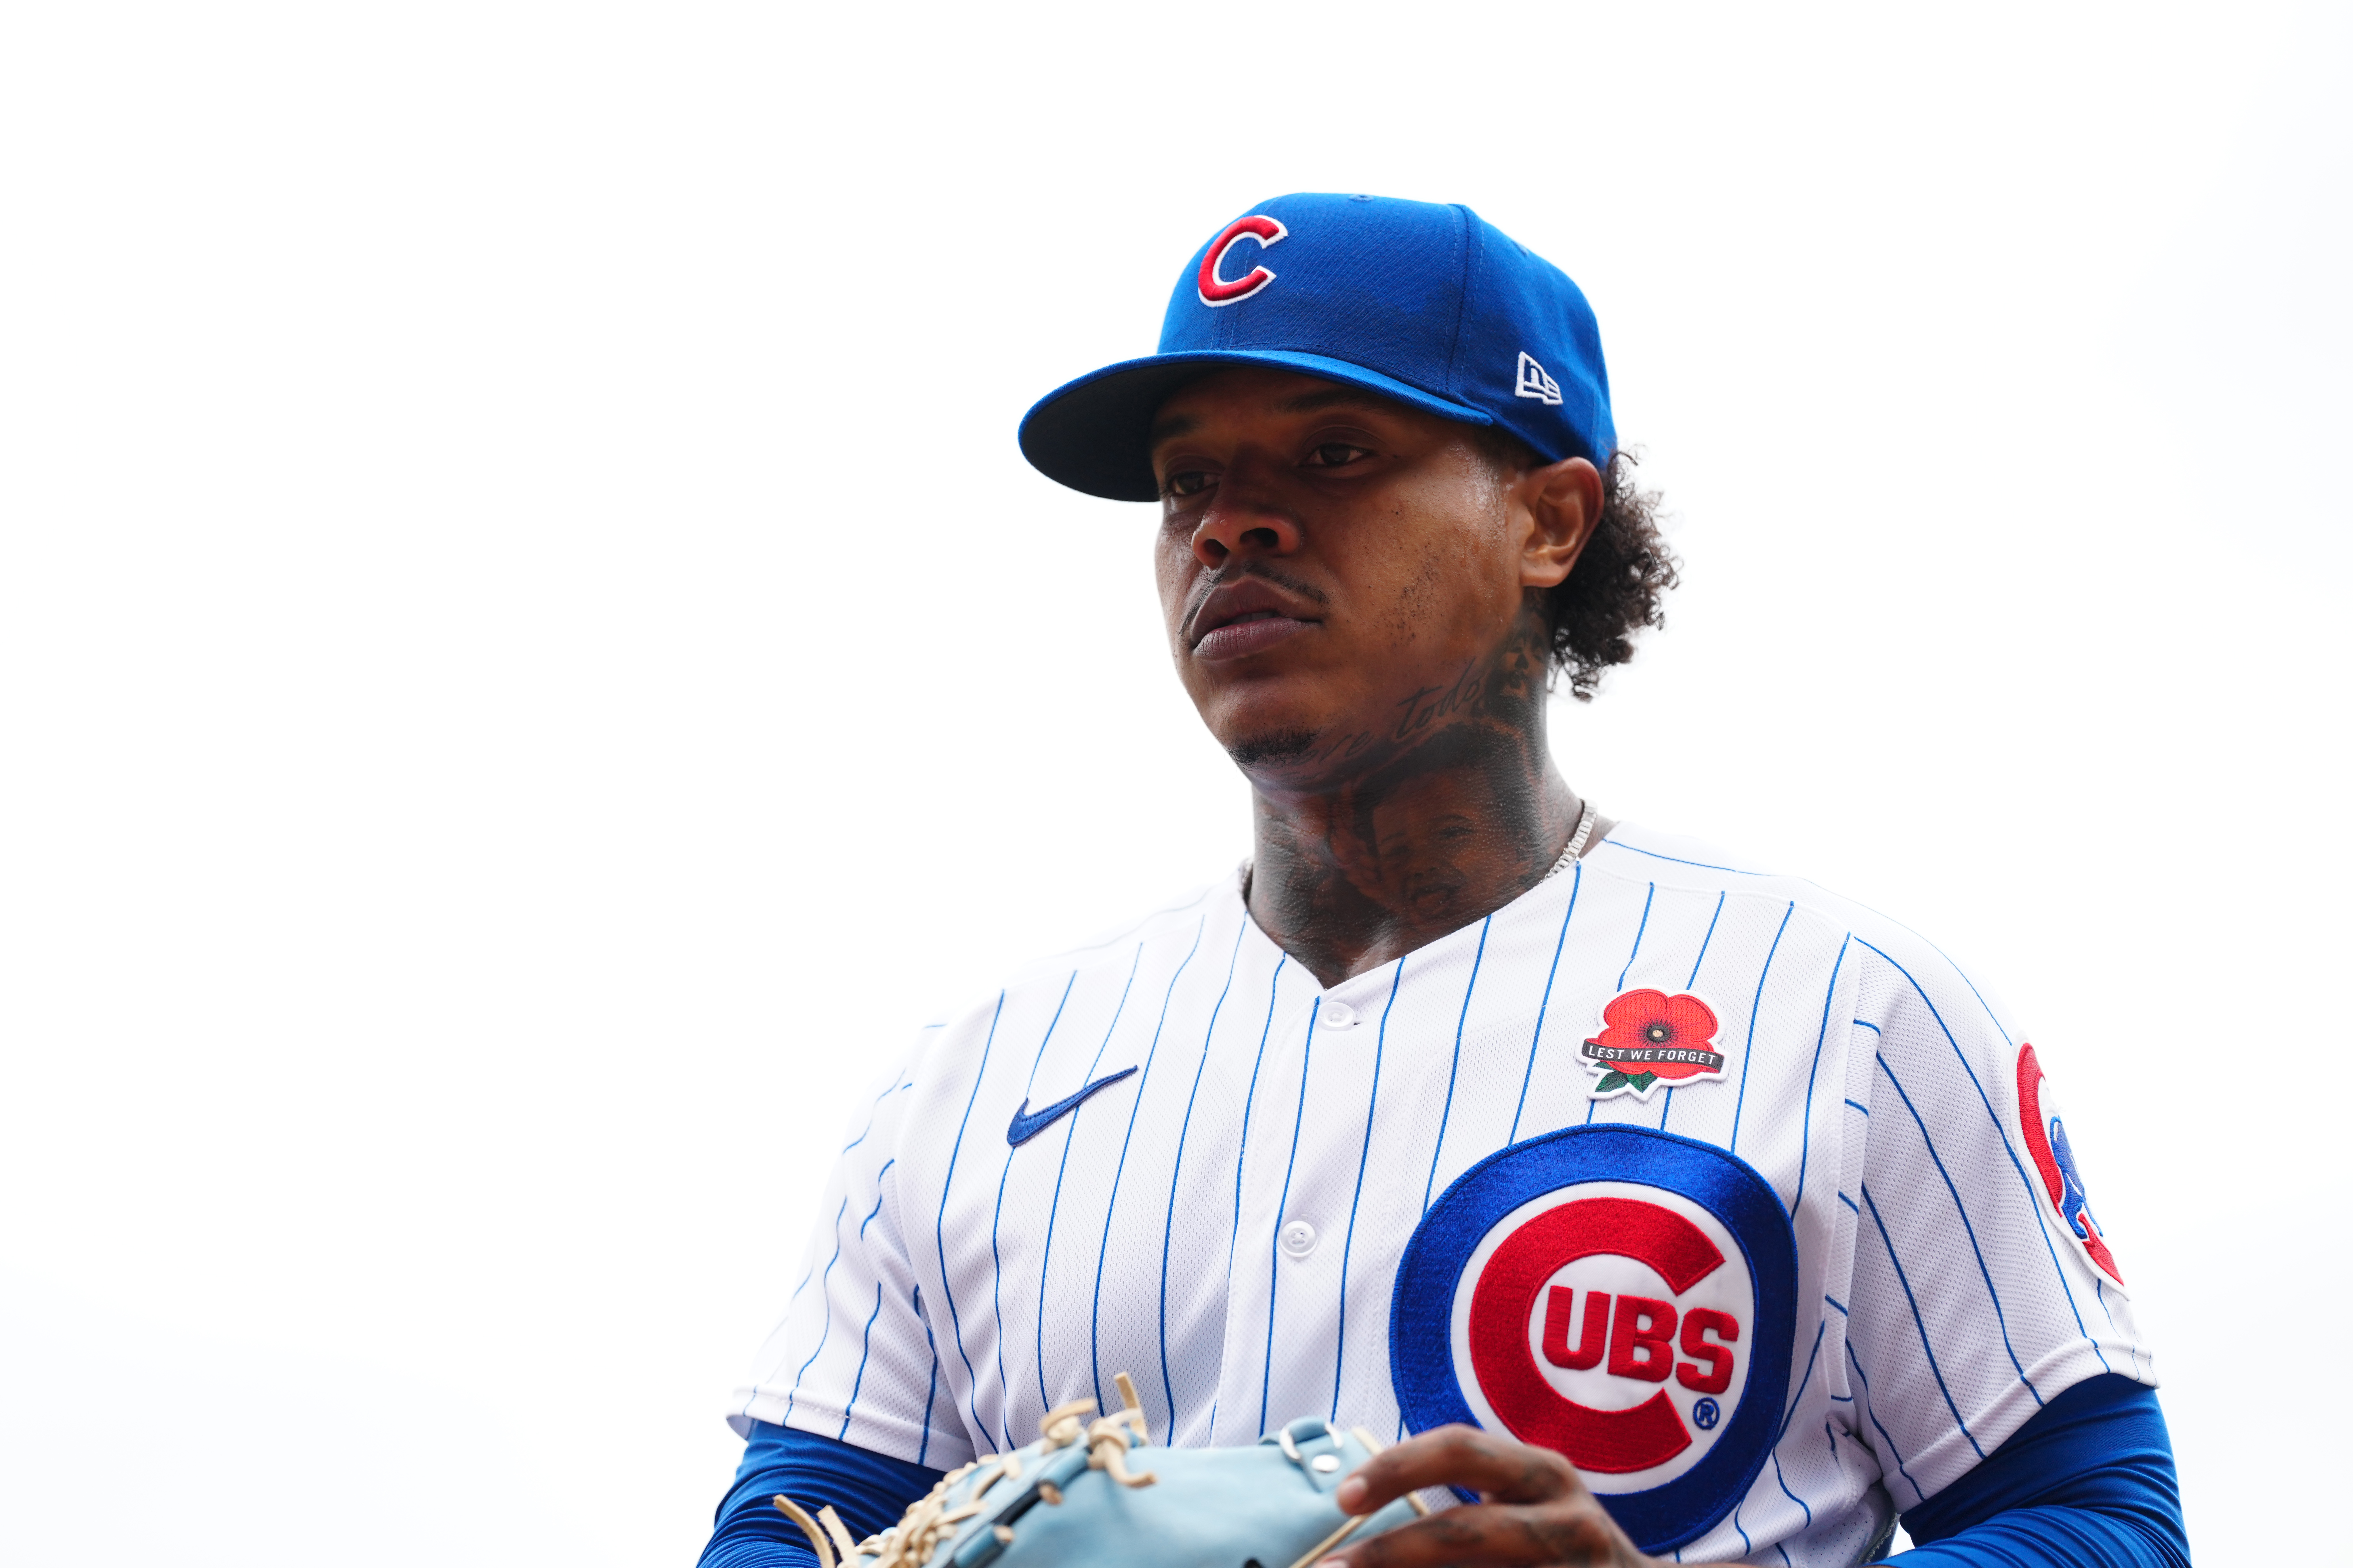 Reds: Cubs are the biggest obstacle to winning the NL Central in 2023